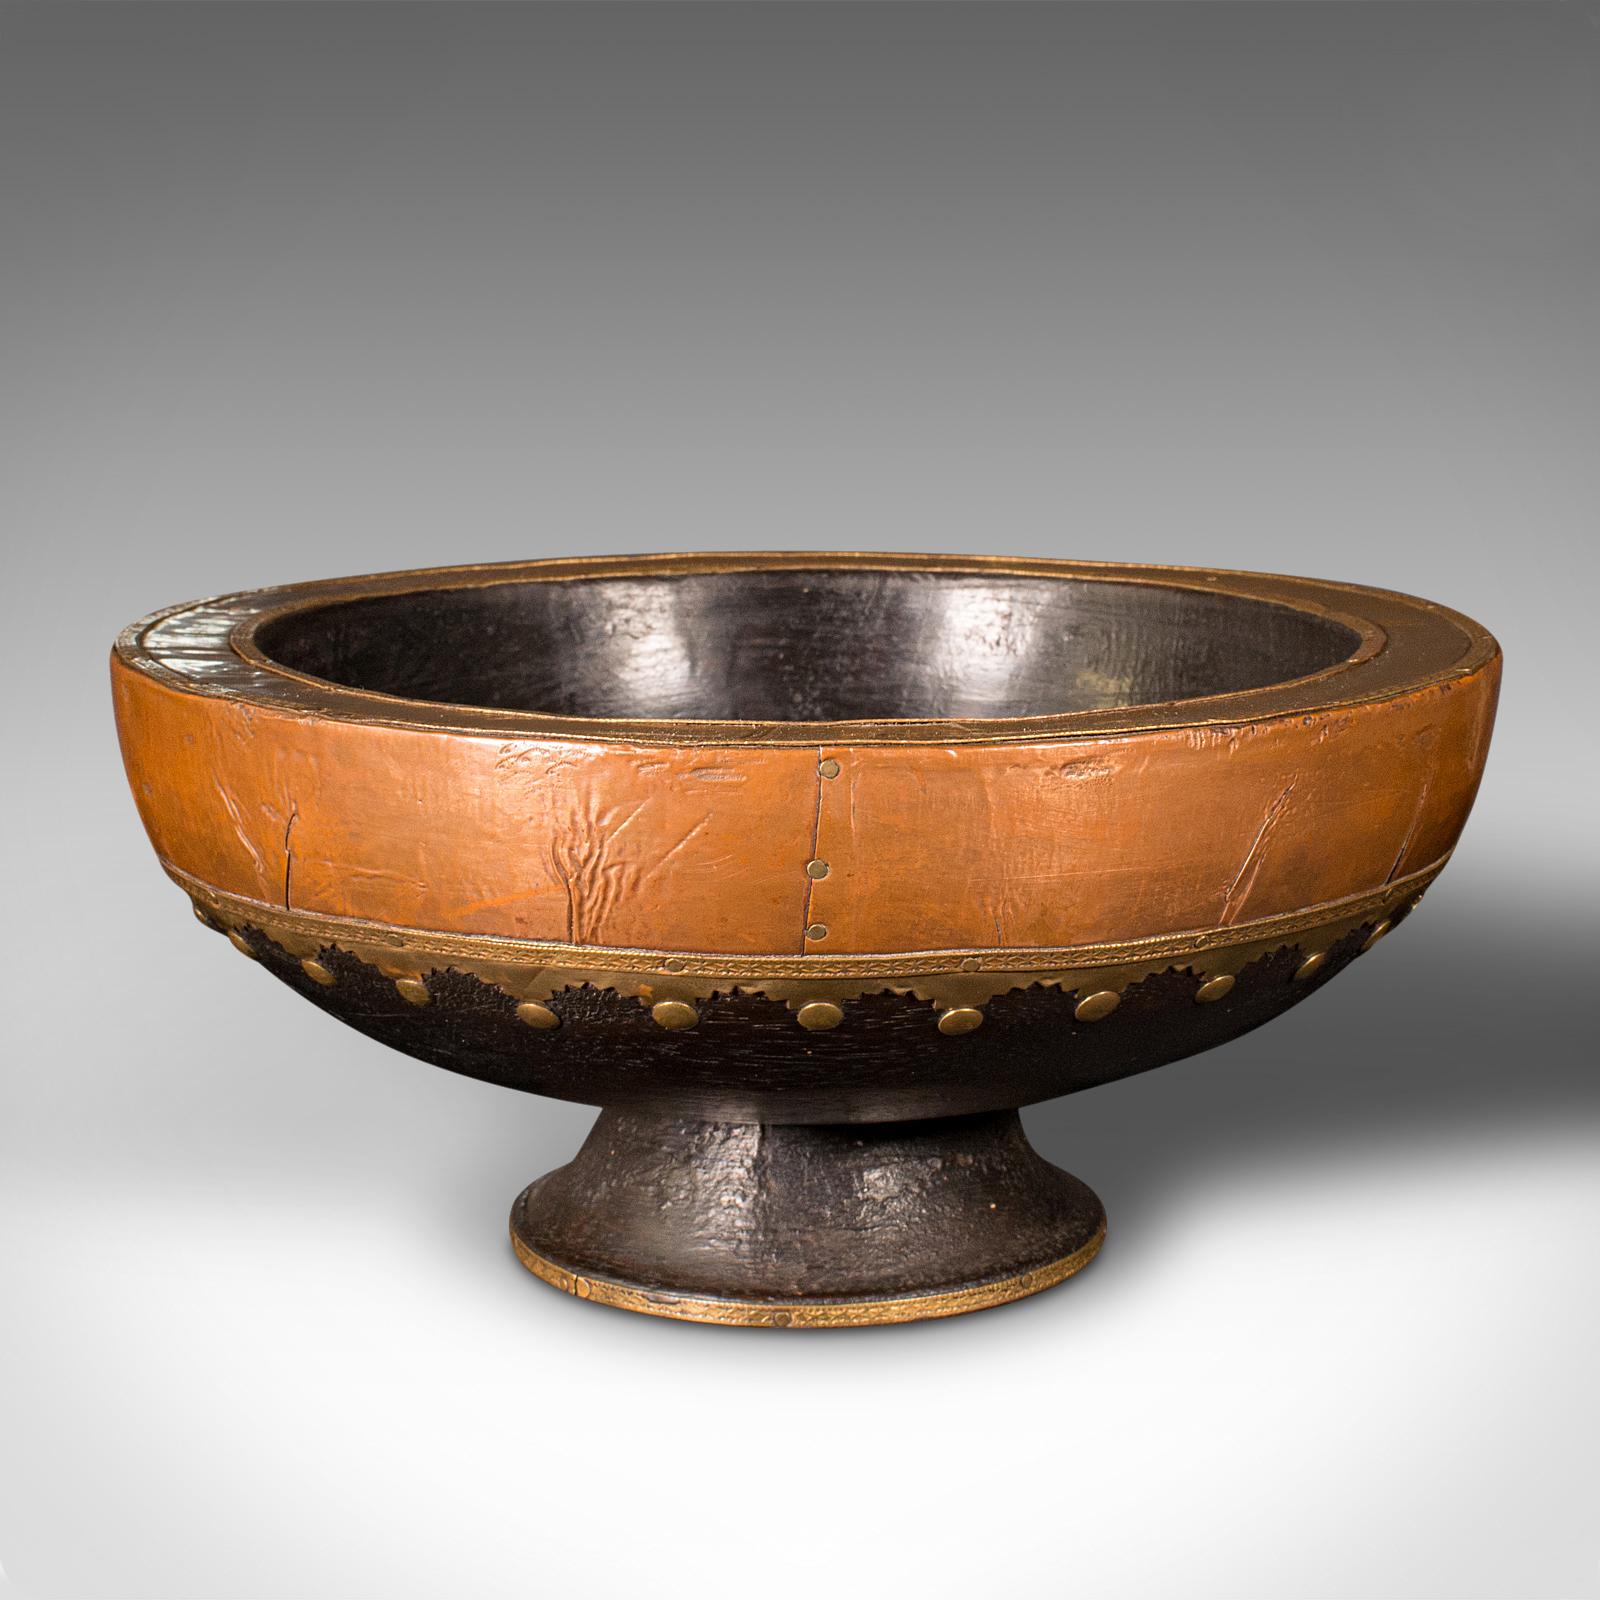 This is an antique ceremonial collection bowl. An Indian, ebonised dish with brass and copper decor, dating to the late Victorian period, circa 1900.

Fascinating decoration and tonality to this appealing bowl
Displays a desirable aged patina and